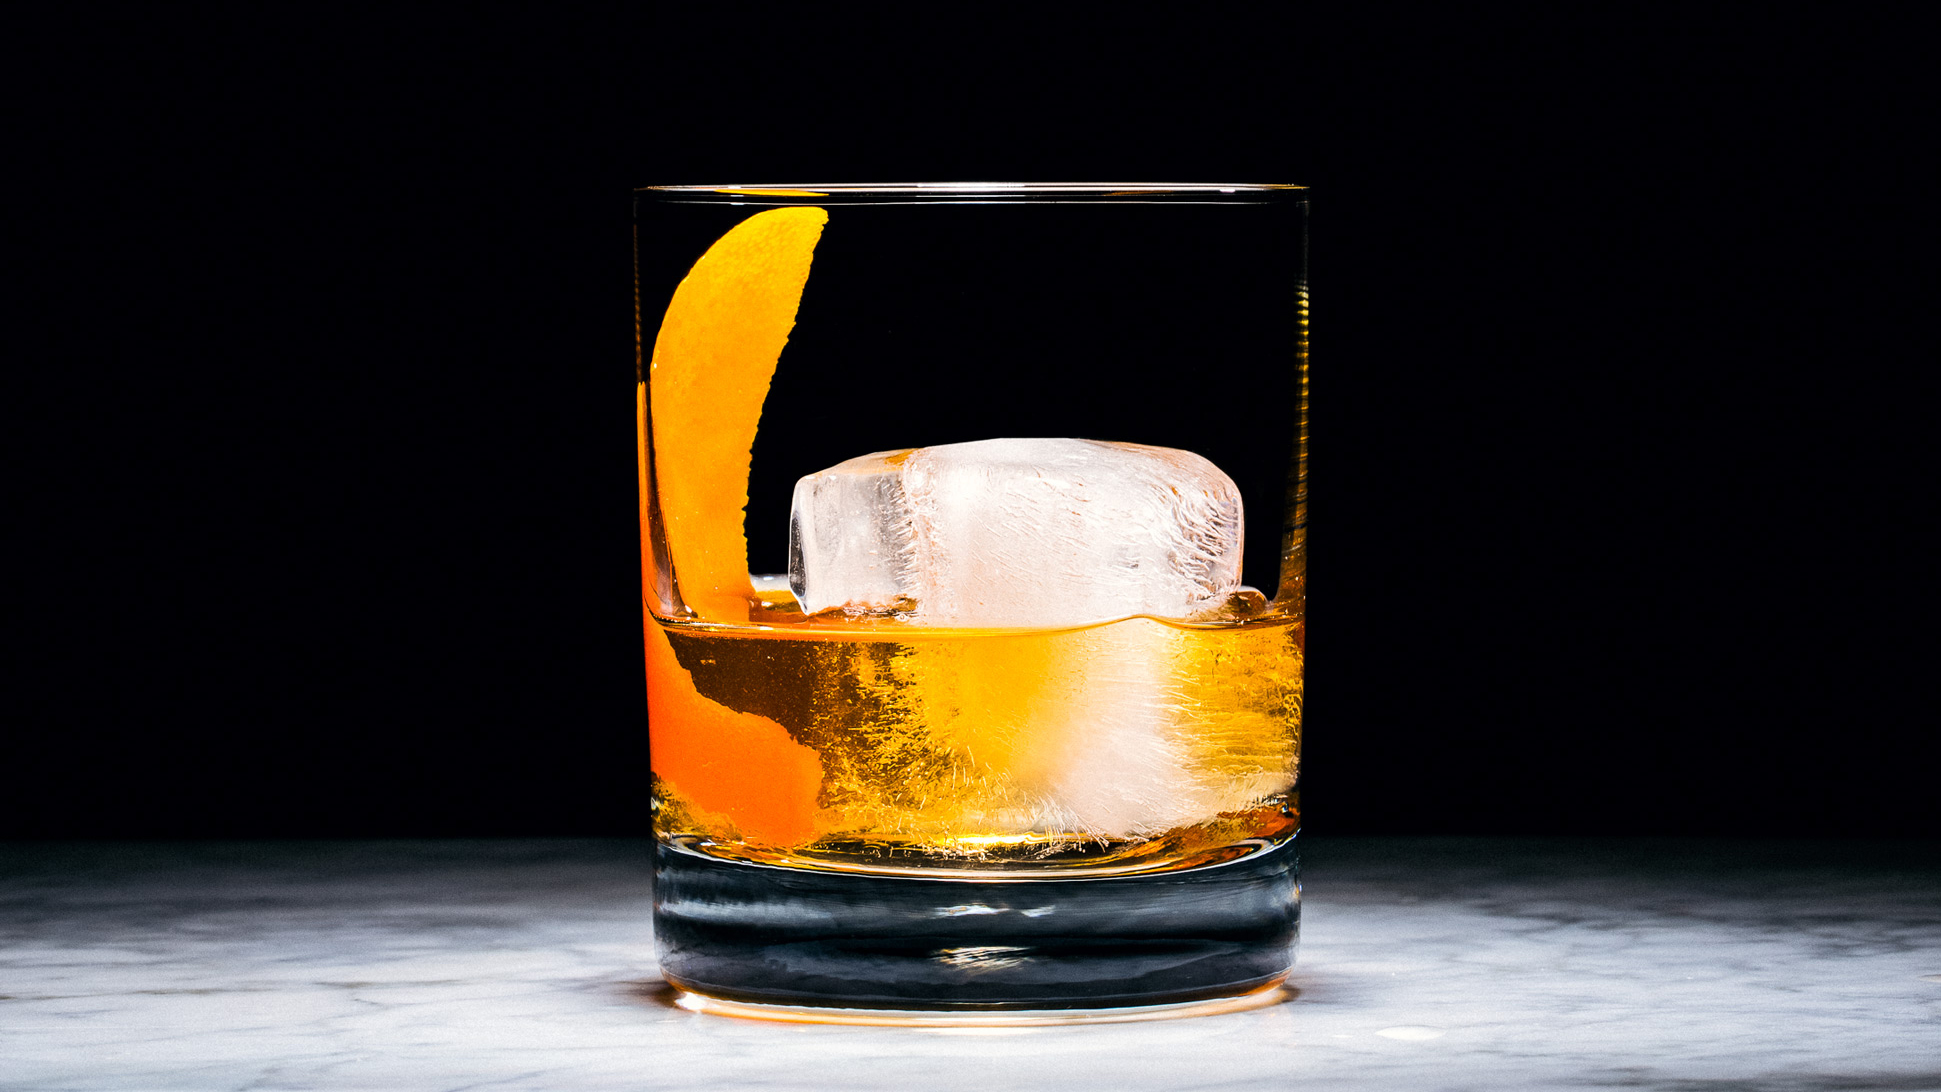 The 17 Best Bourbon Whiskeys You Can Buy In 2019 photo